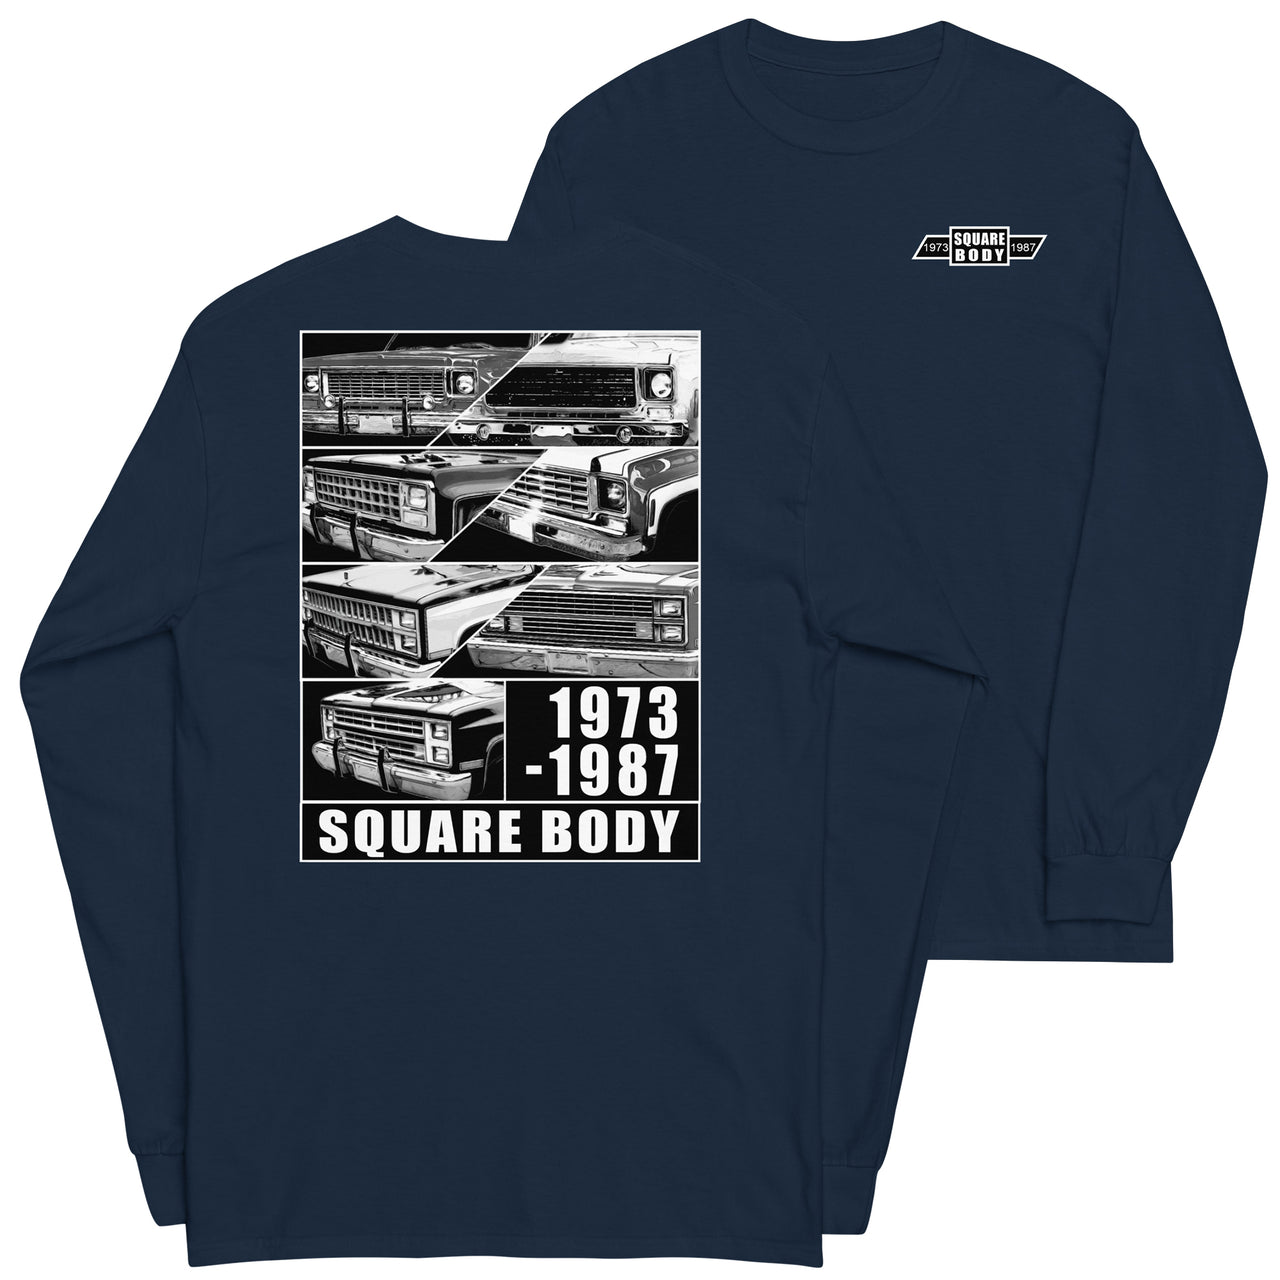 Square Body 1973-1987 Long Sleeve T-Shirt in navy